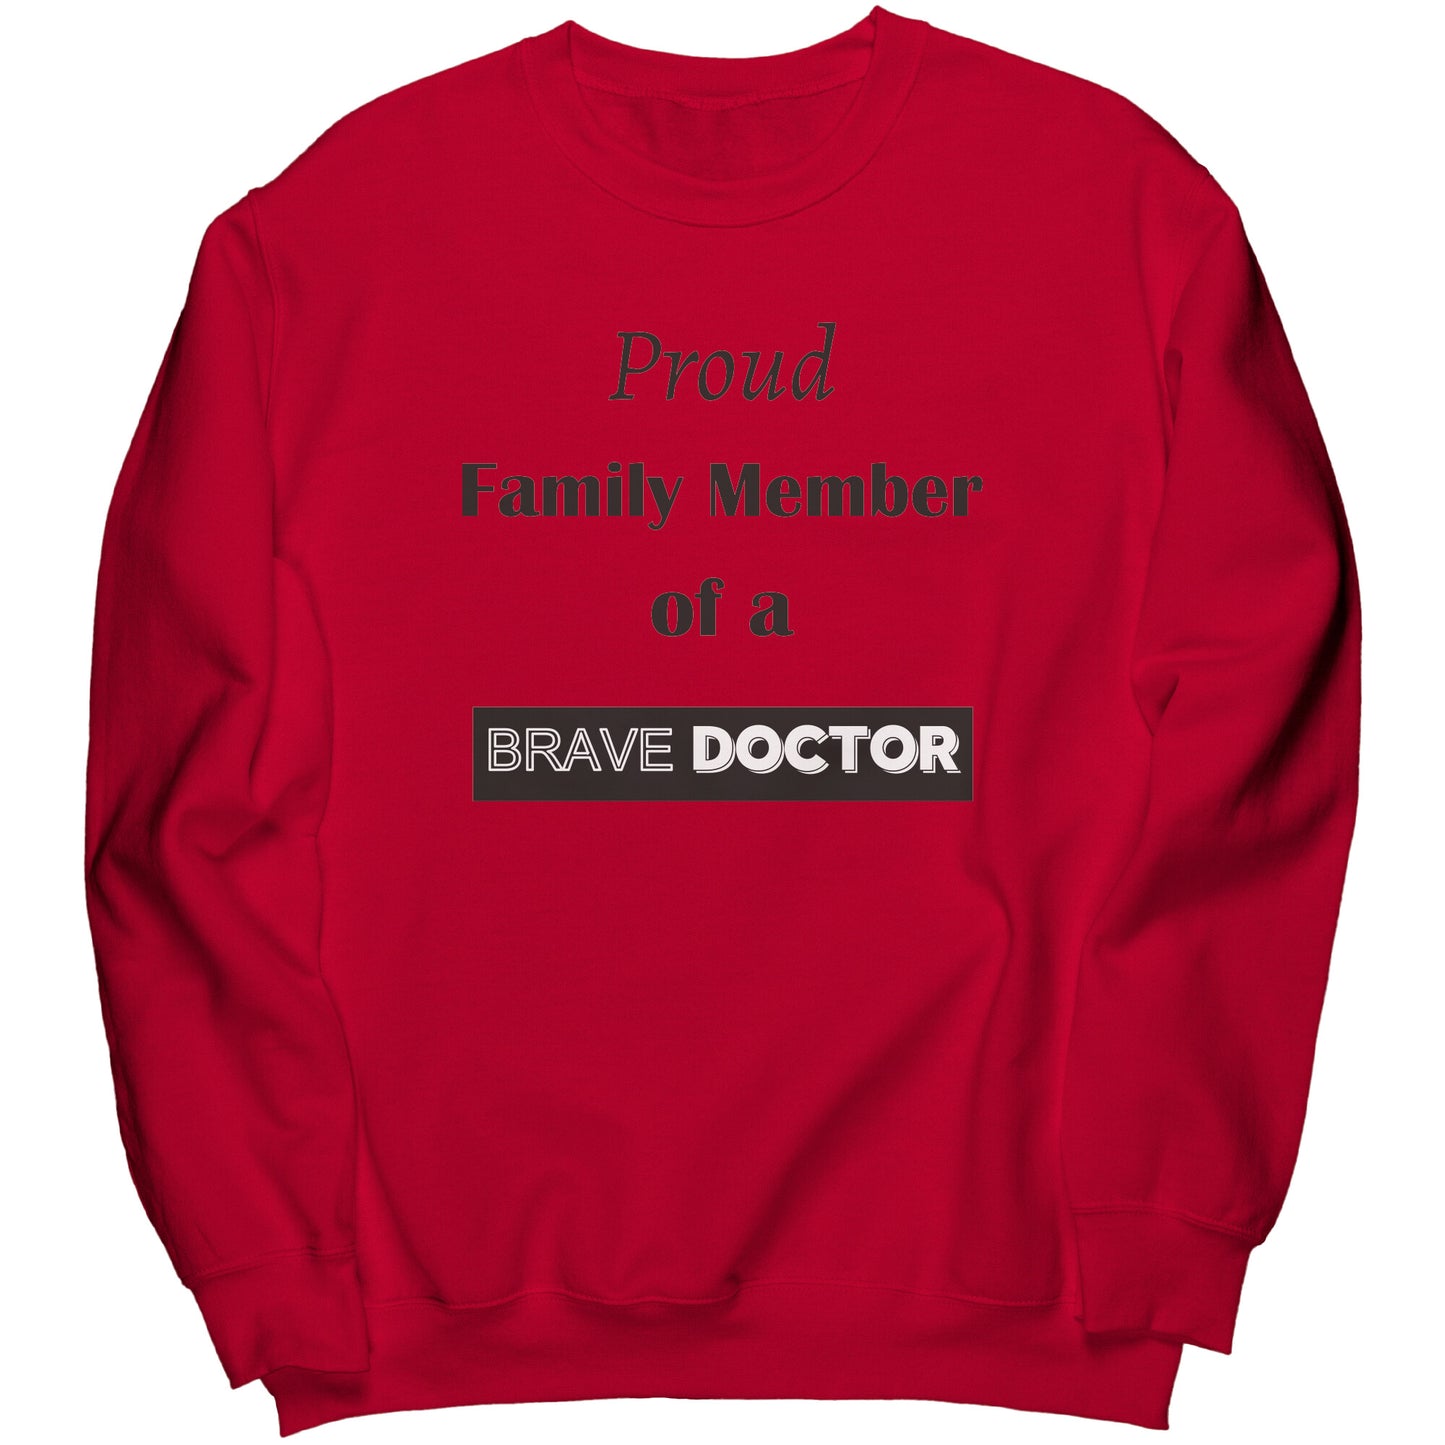 Proud Family Member of a Brave Doctor Lettering Sweatshirt - Signs and Seasons Gifts